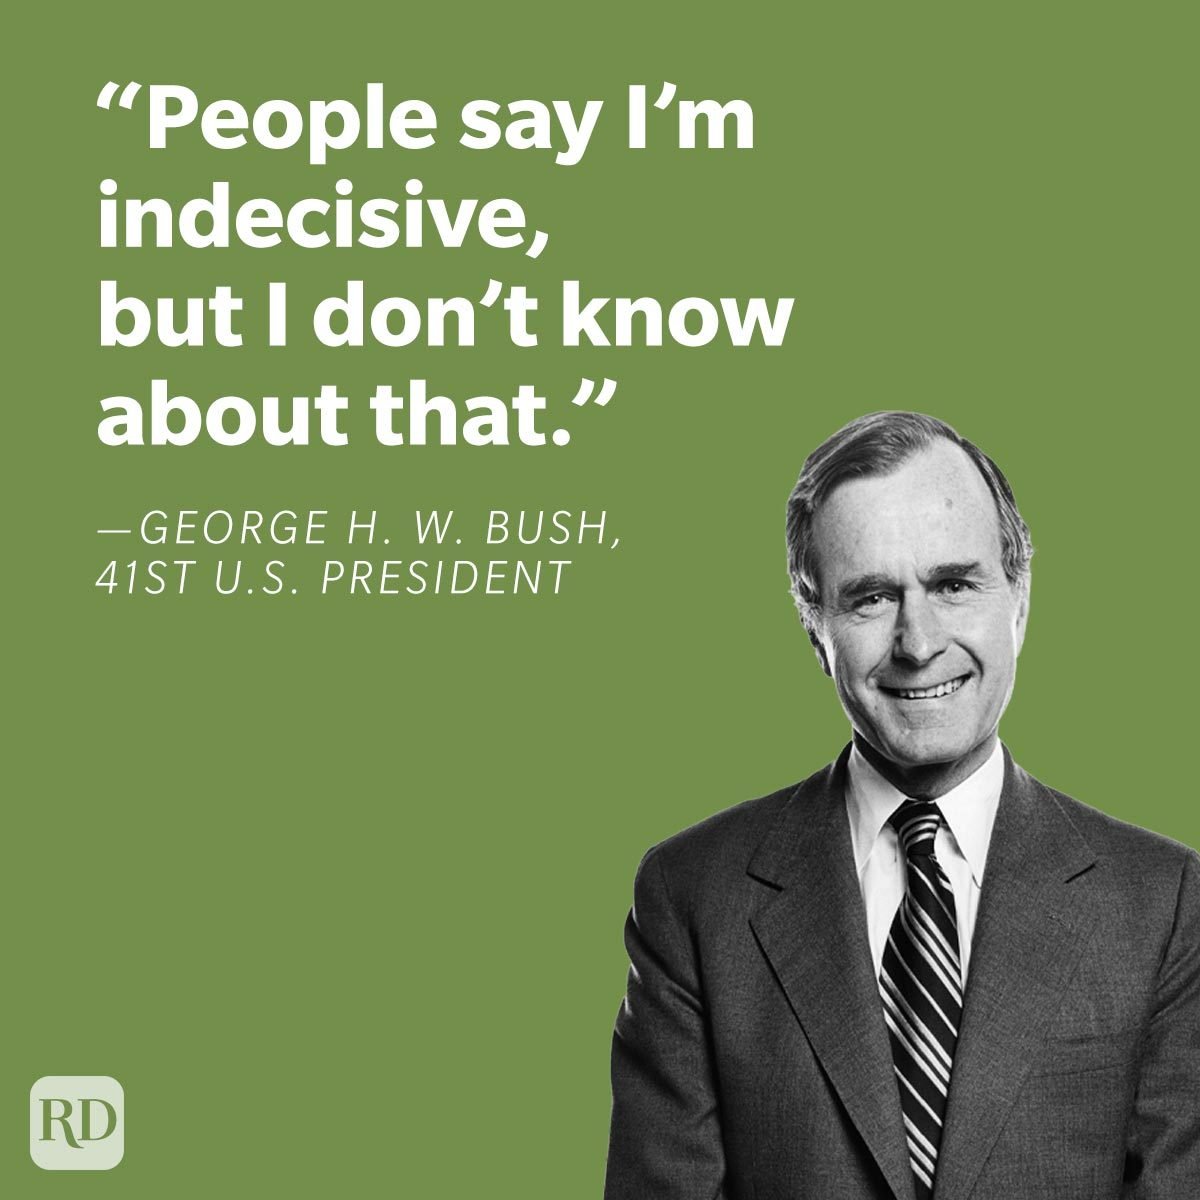 Presidential Jokes Told By U S Presidents “People say I’m indecisive, but I don’t know about that.” —George H. W. Bush, 41st U.S. president on green background